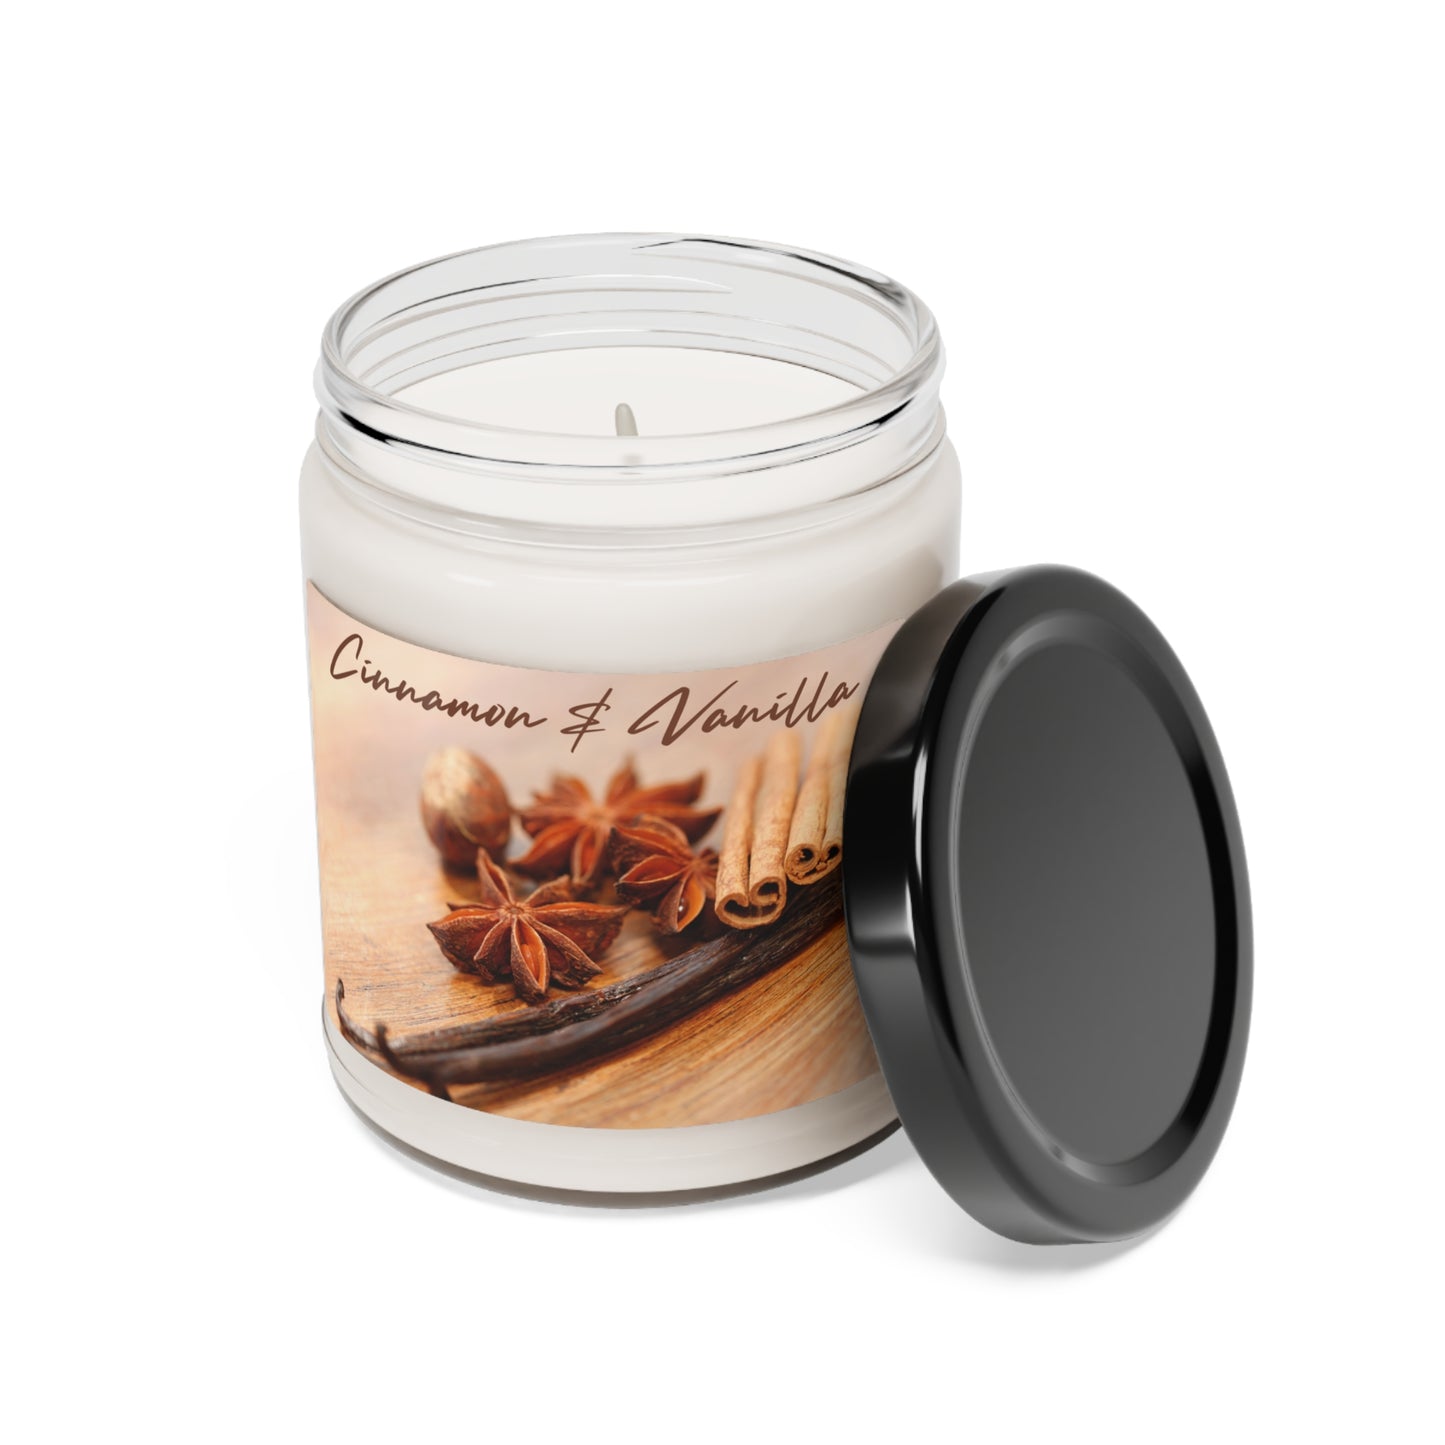 Warm and Aromatic Cinnamon & Vanilla Scented Soy Candle, 9oz Glass Jar